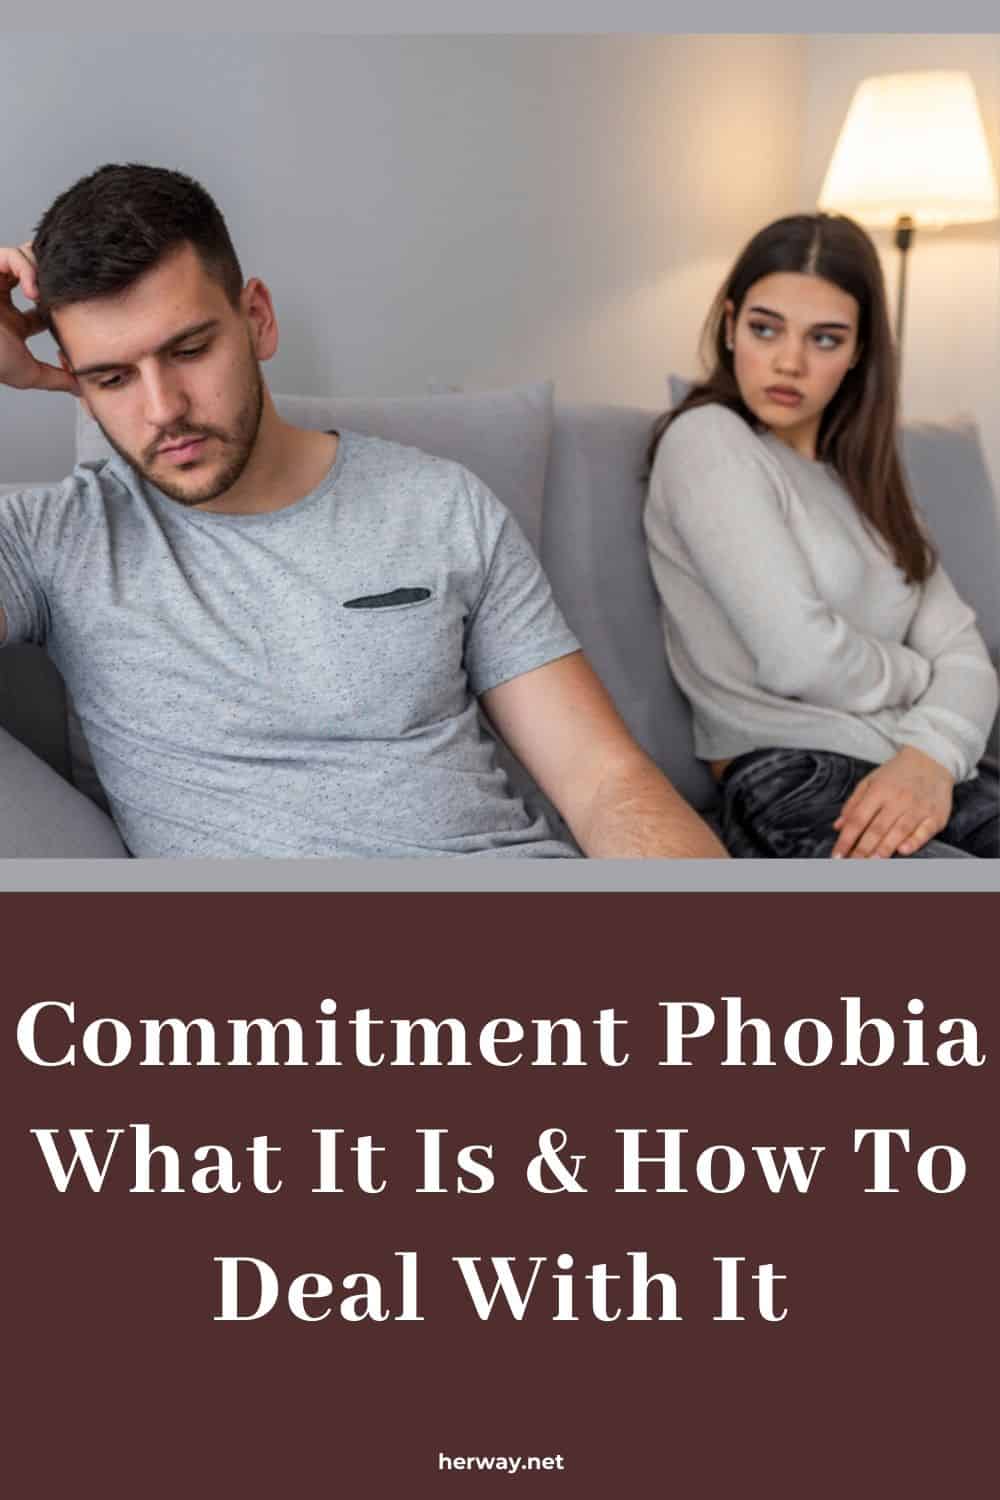 Commitment Phobia What It Is & How To Deal With It